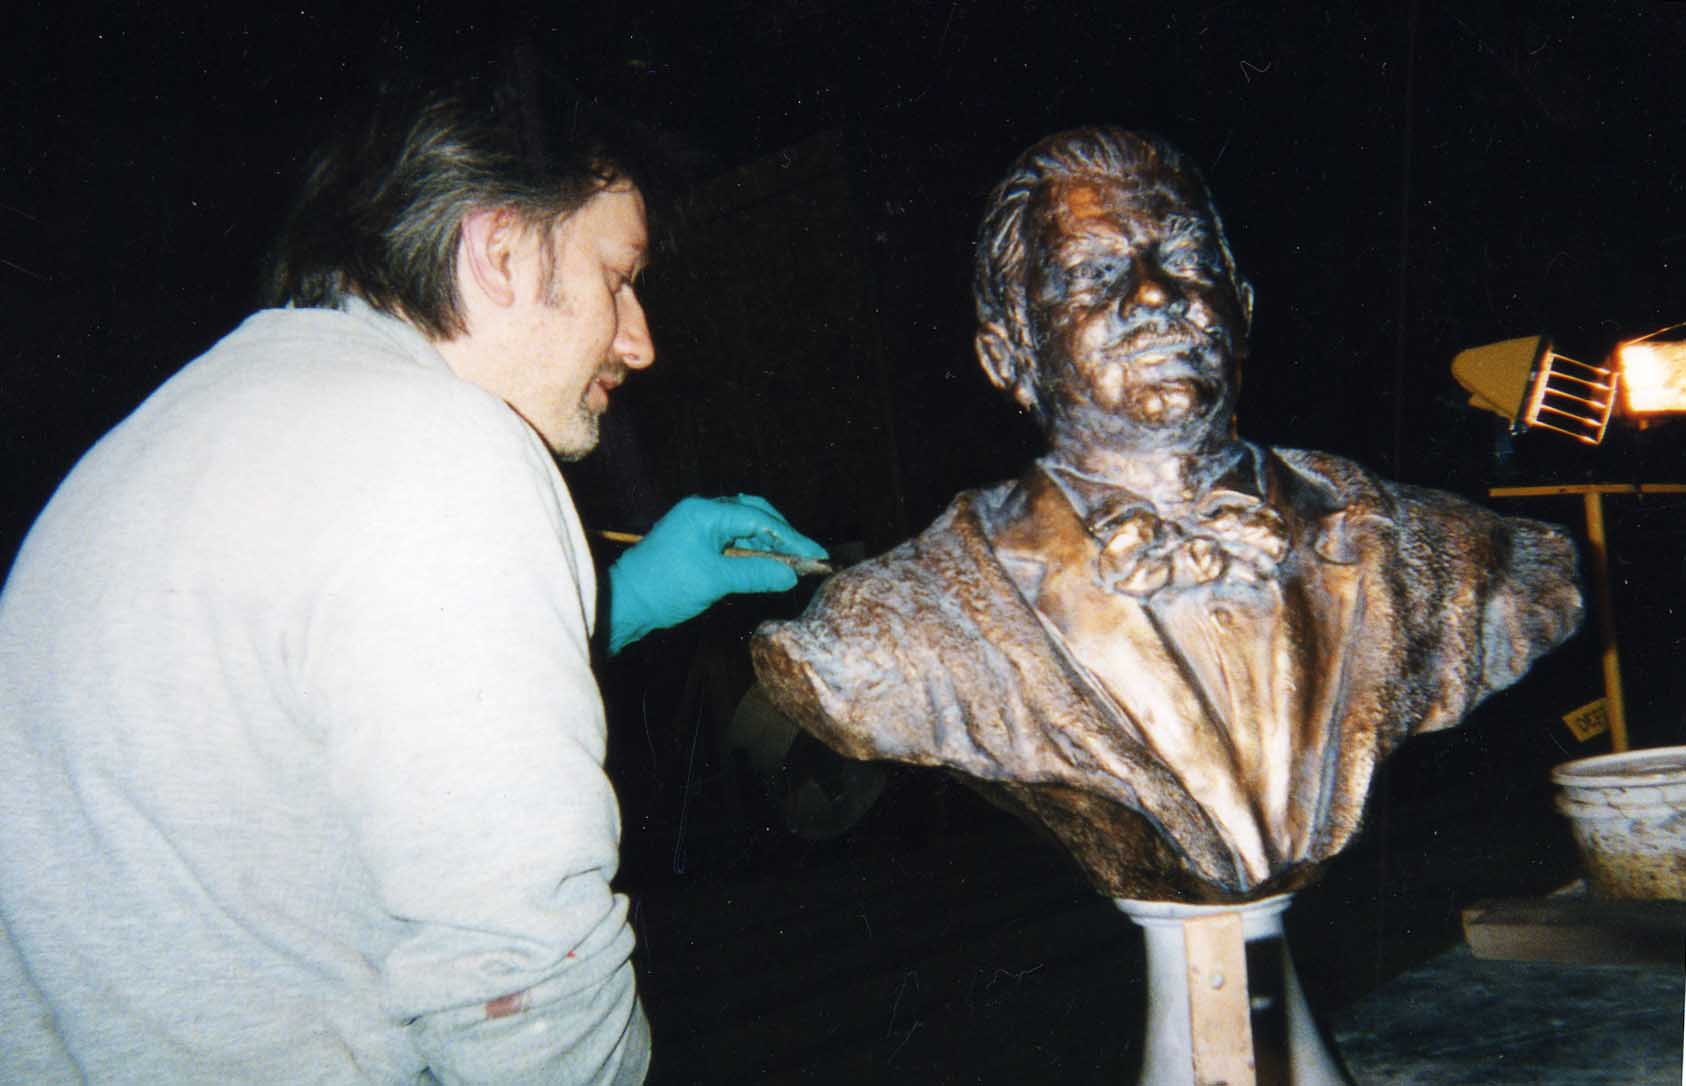 Chris finishing off a bust for 